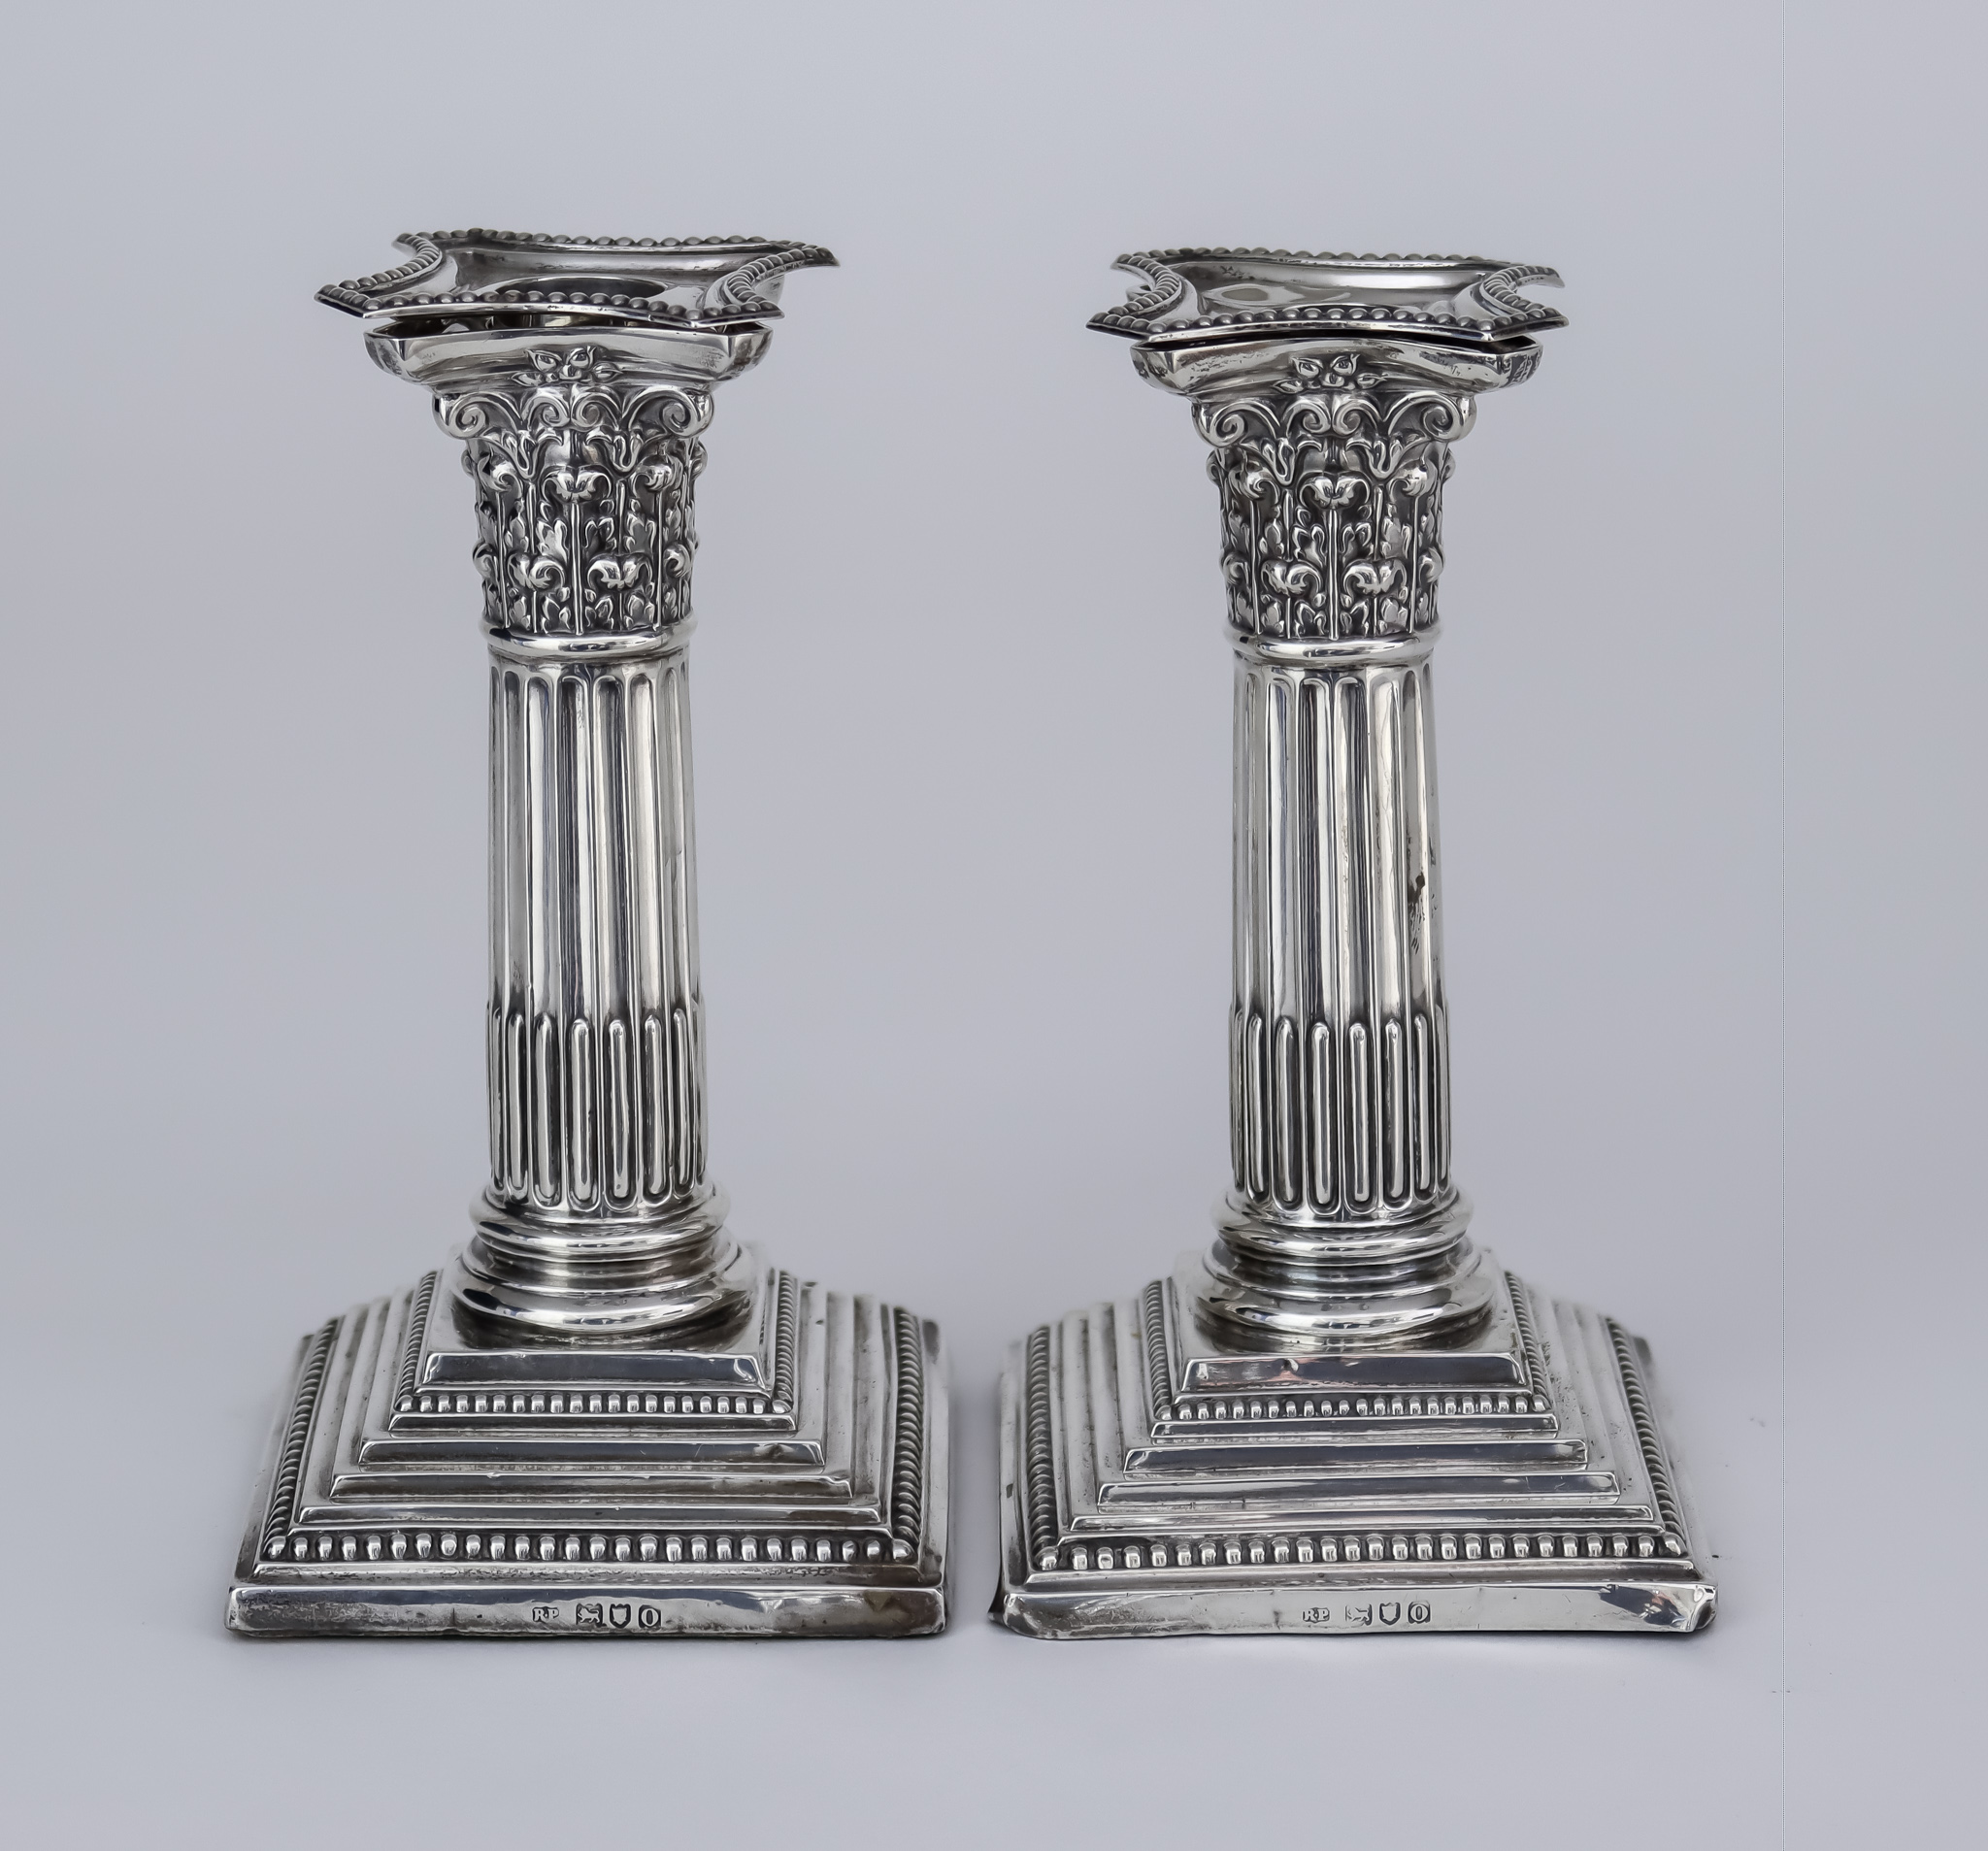 A Pair of Edward VII Silver Pillar Candlesticks, By Robert Pringle & Sons, London 1909, with